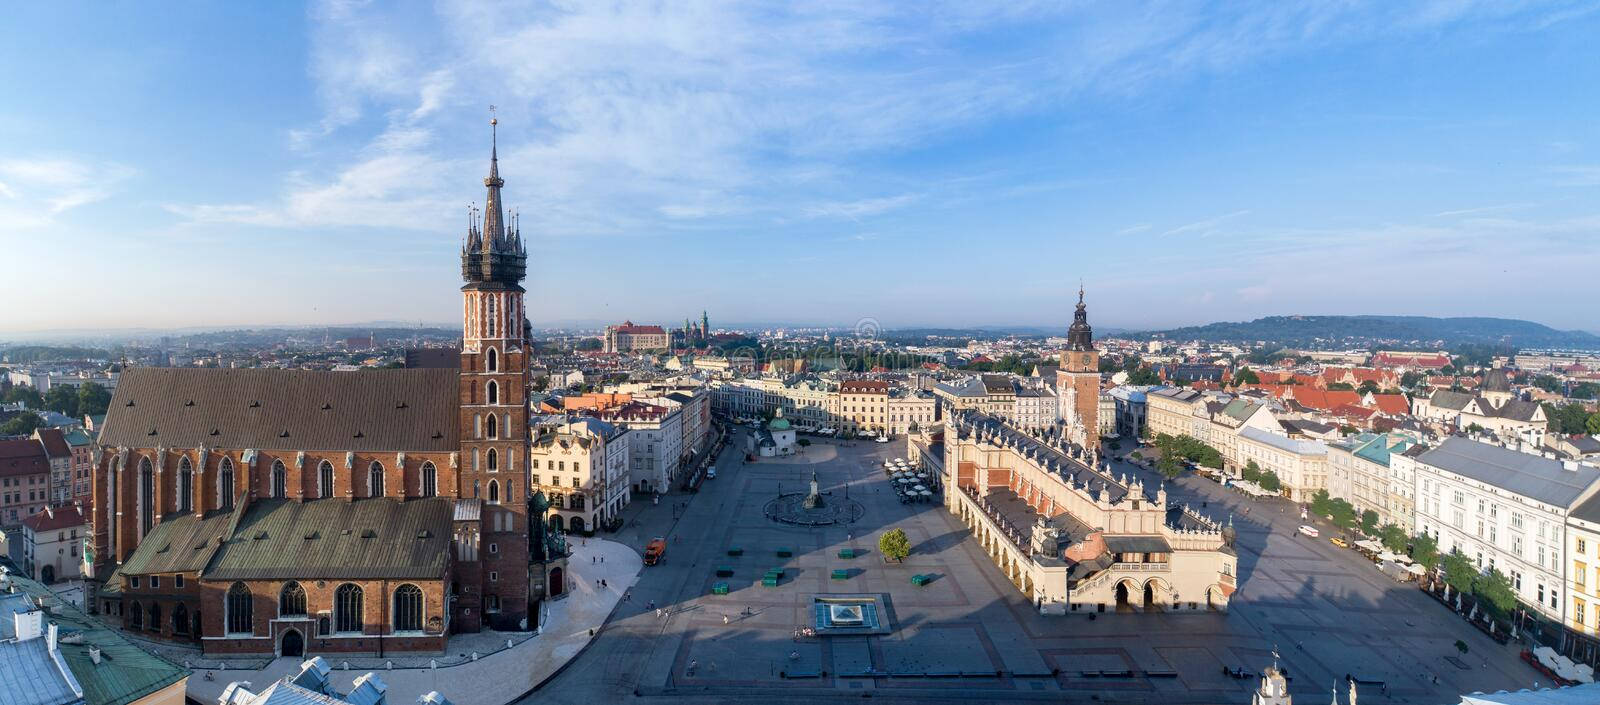 Panoramic View Of The Old Town In Krakow Poland Wallpaper